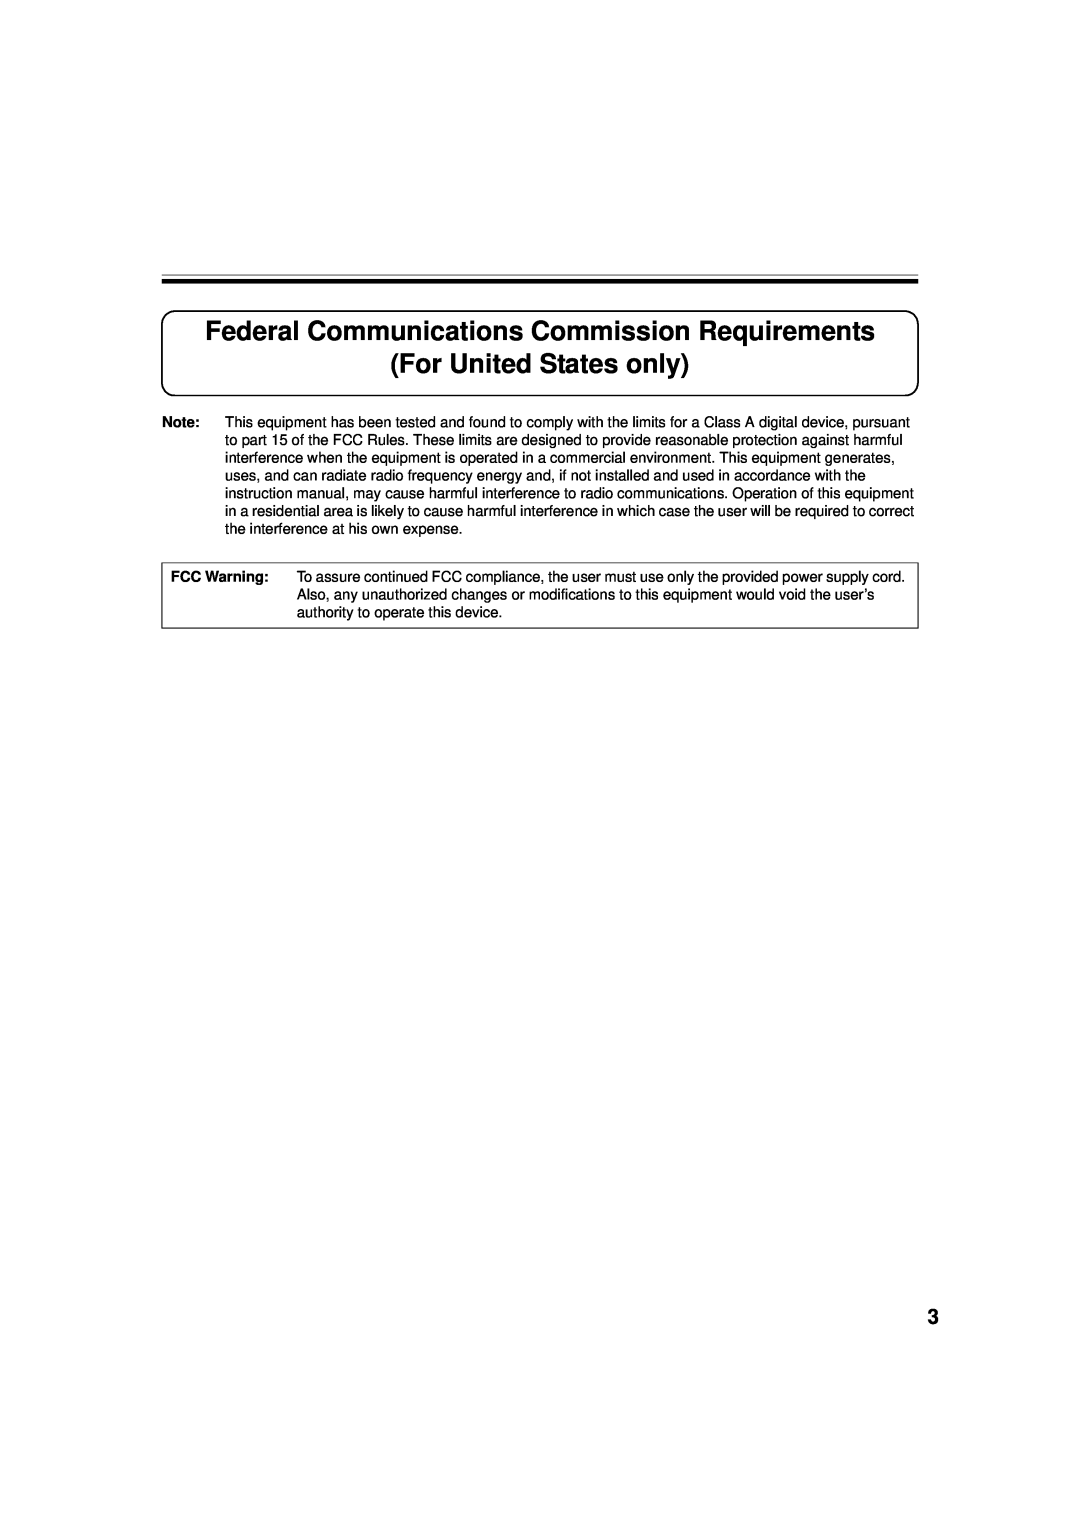 Panasonic UB-5338C, UB-5838C operating instructions Federal Communications Commission Requirements For United States only 